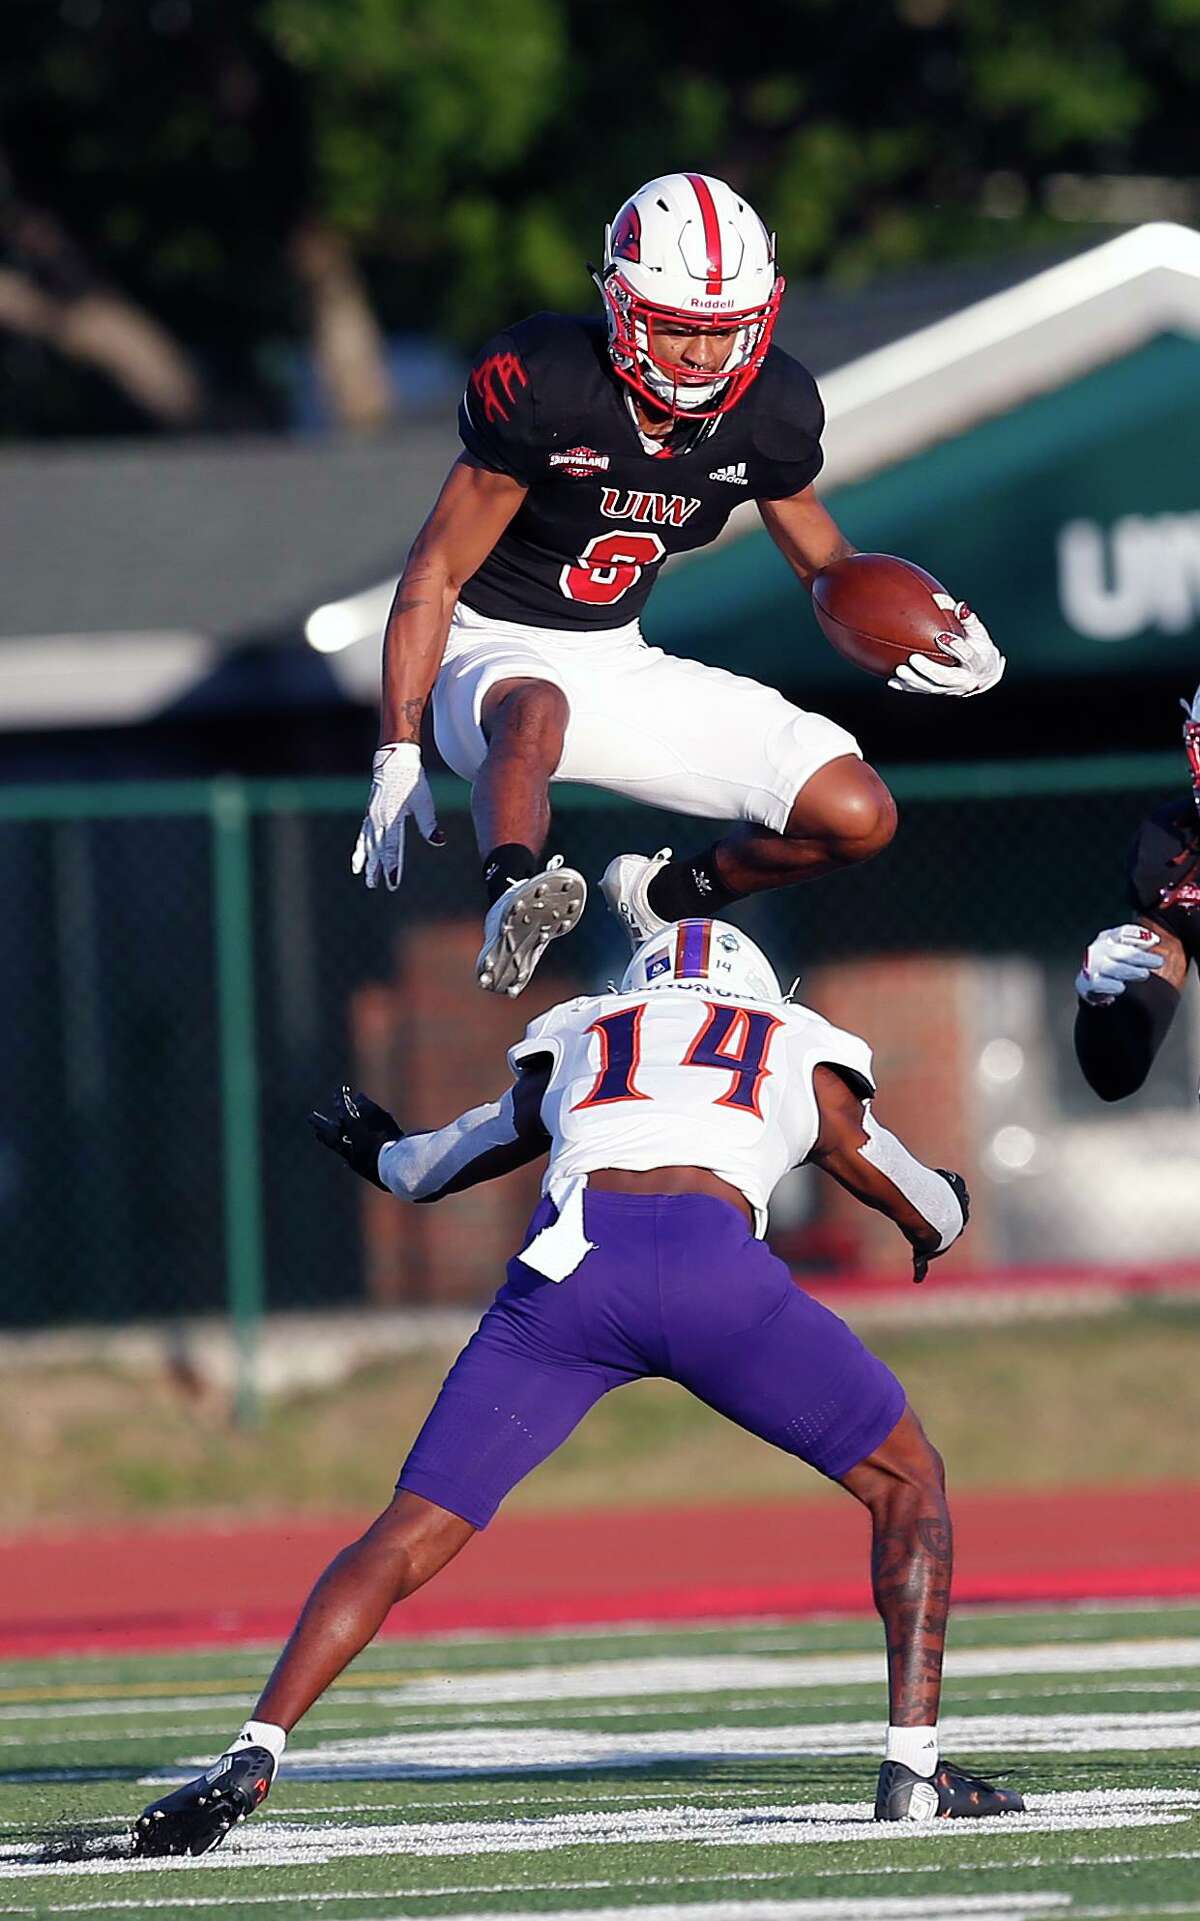 UIW Tre Wolf #9 leaps over Northwestern State Waylon Washington after a reception in first quarter. College Football UIW vs. Northwestern State on Saturday, April 10,2021 at UIW.